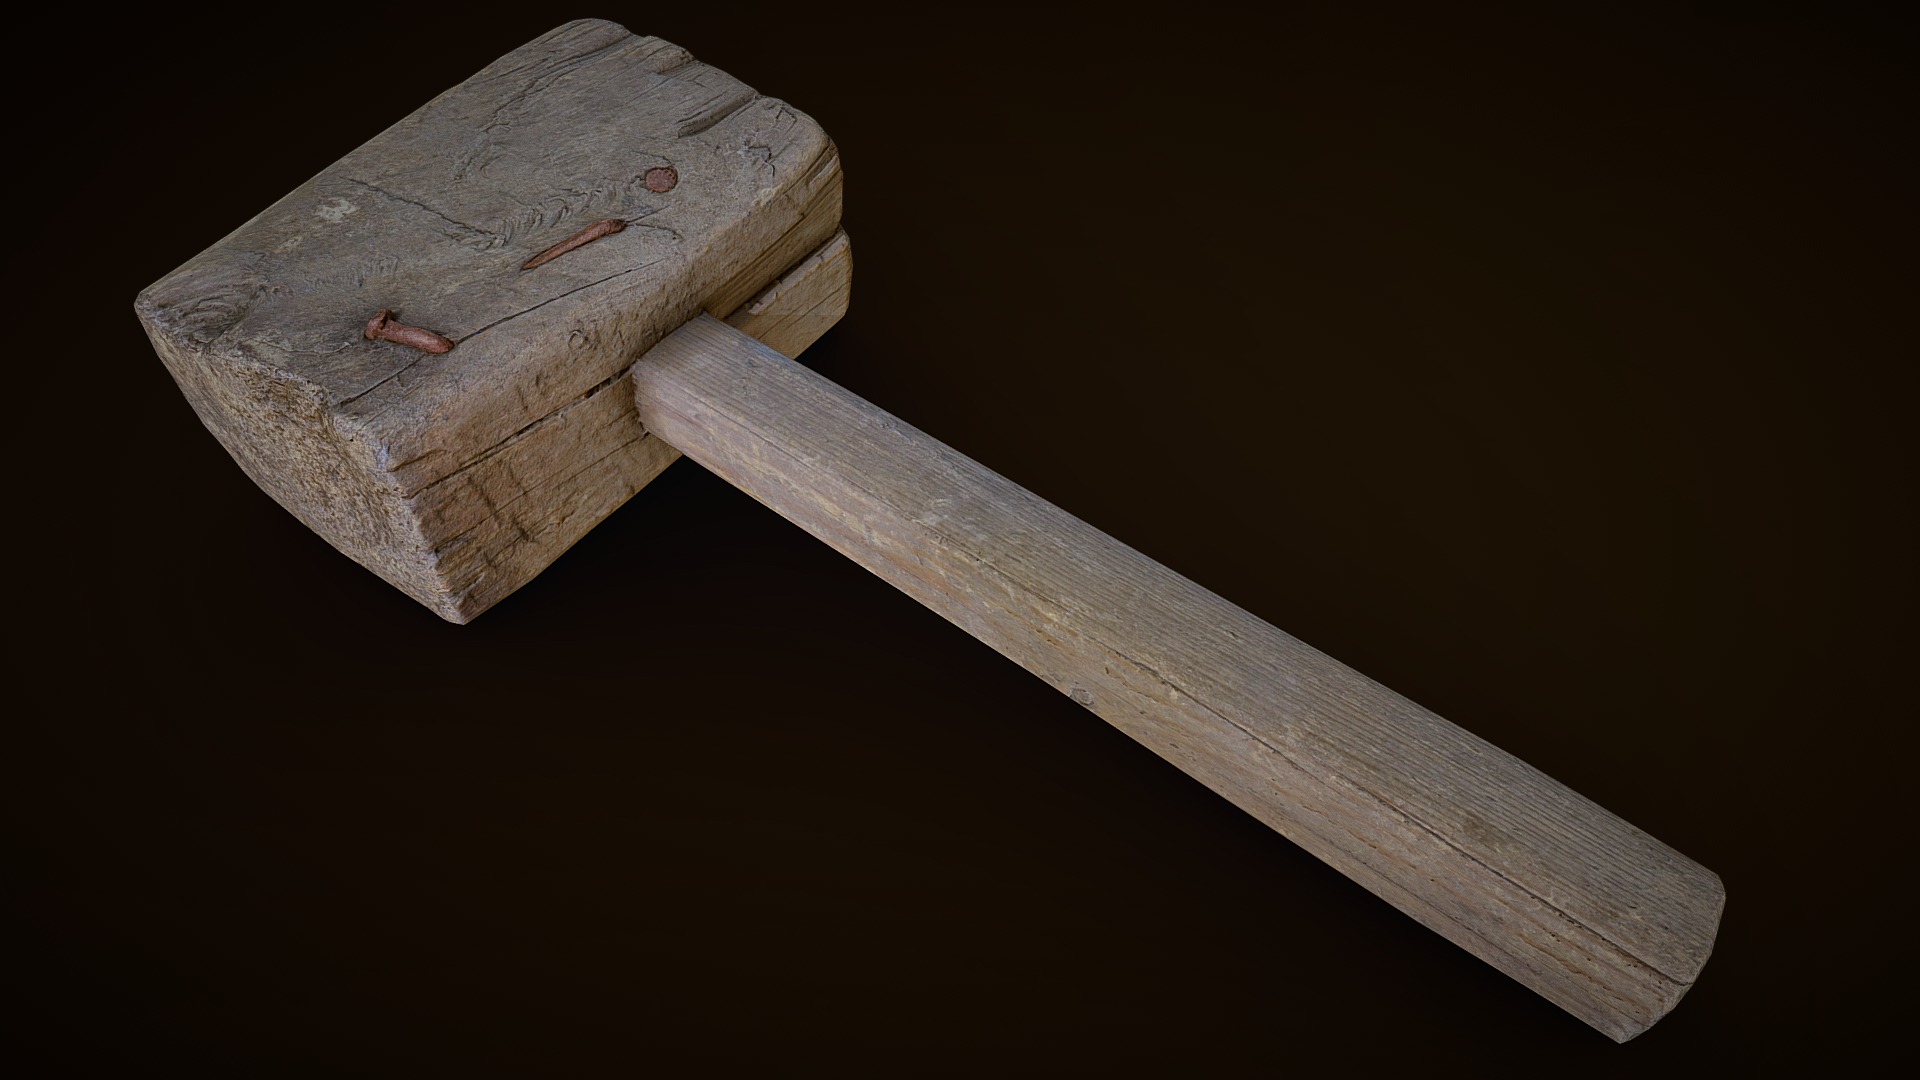 3D model Kiyanka - This is a 3D model of the Kiyanka. The 3D model is about a wooden axe with a black background.